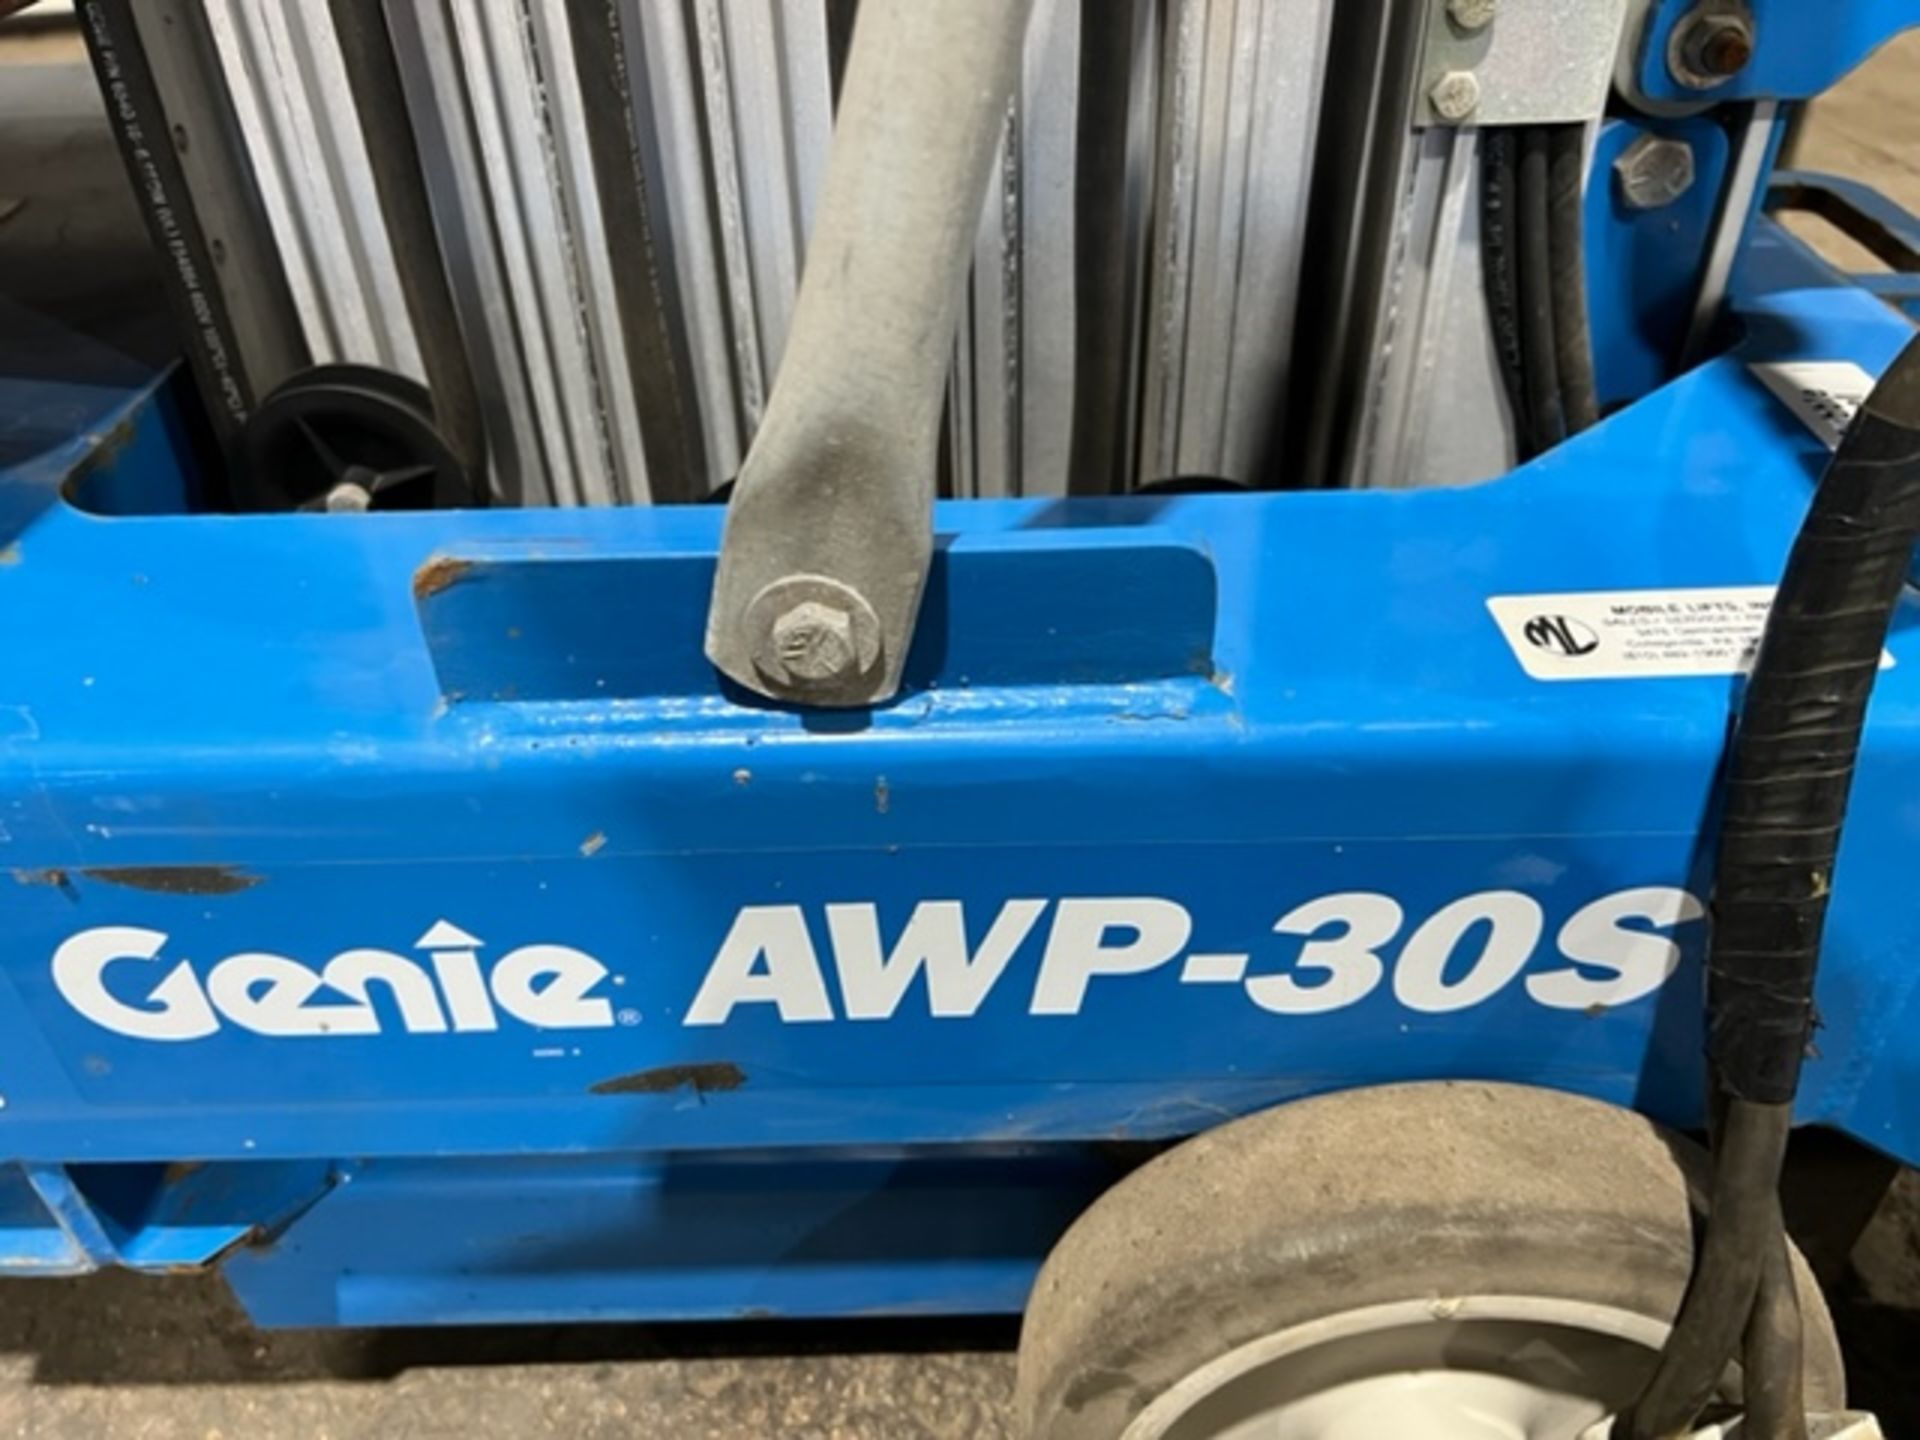 Genie Man Lift model AWP-30-S - 30 feet lift, with controller Electric unit - 350lbs lift capacity - Image 2 of 4